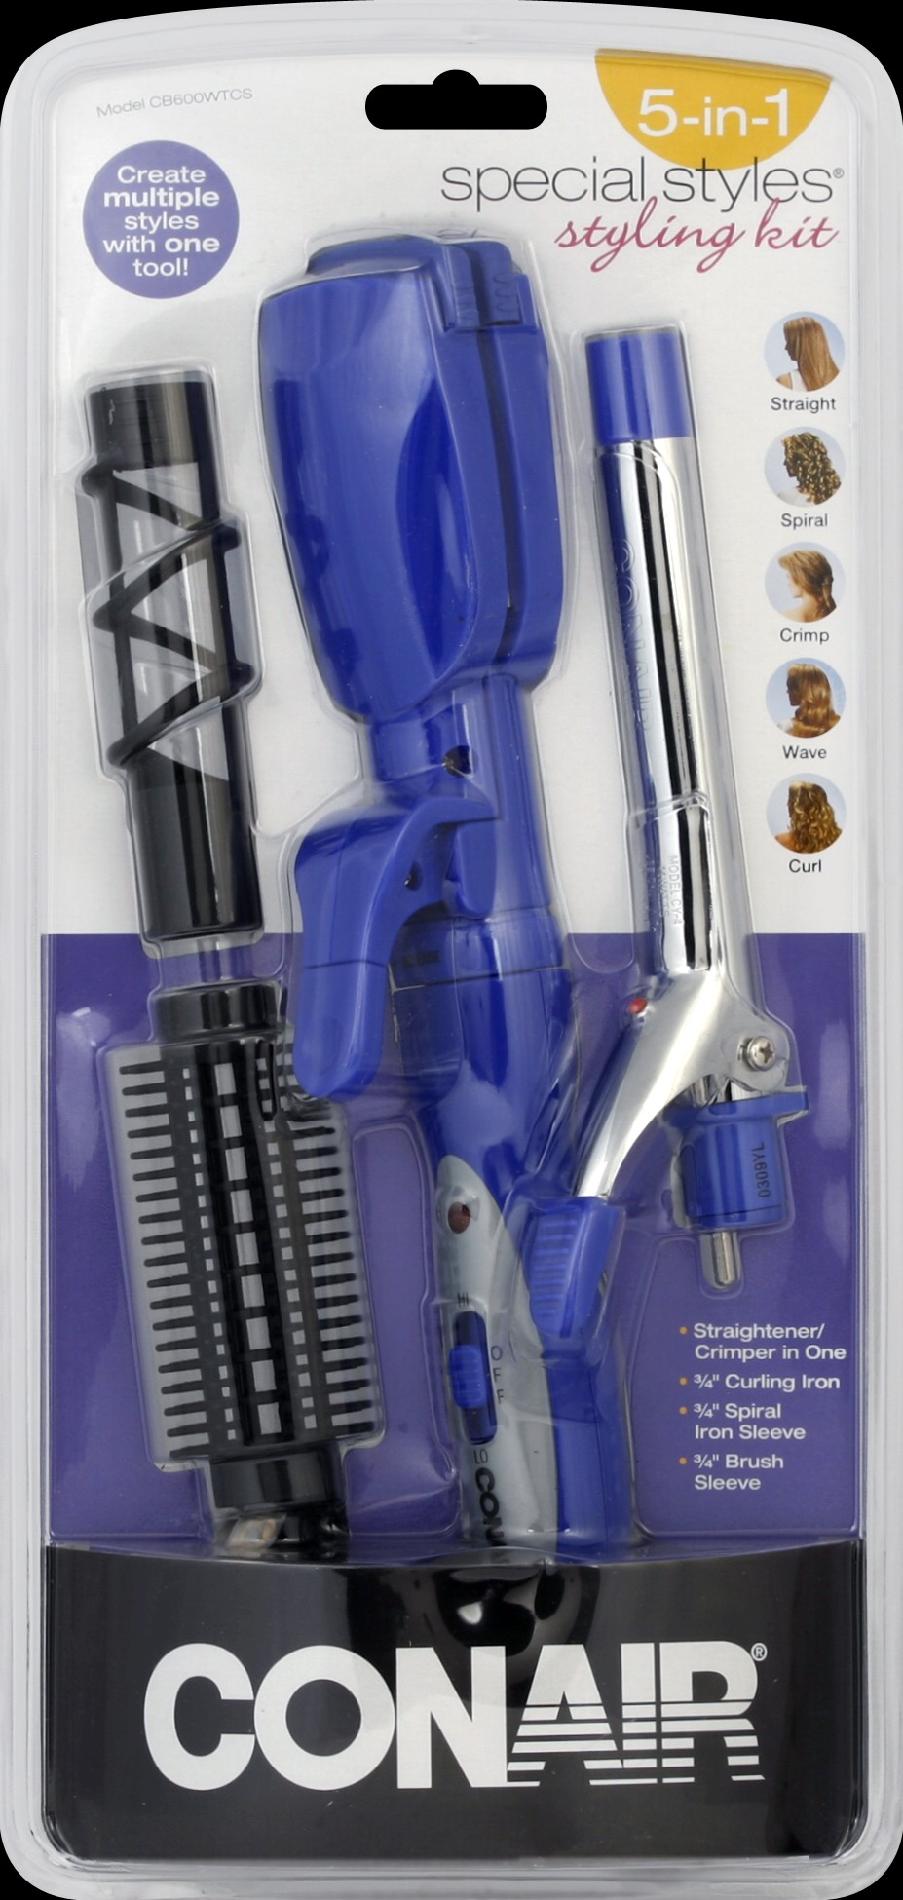 Conair Special Styles Styling Kit  5-in-1  1 kit